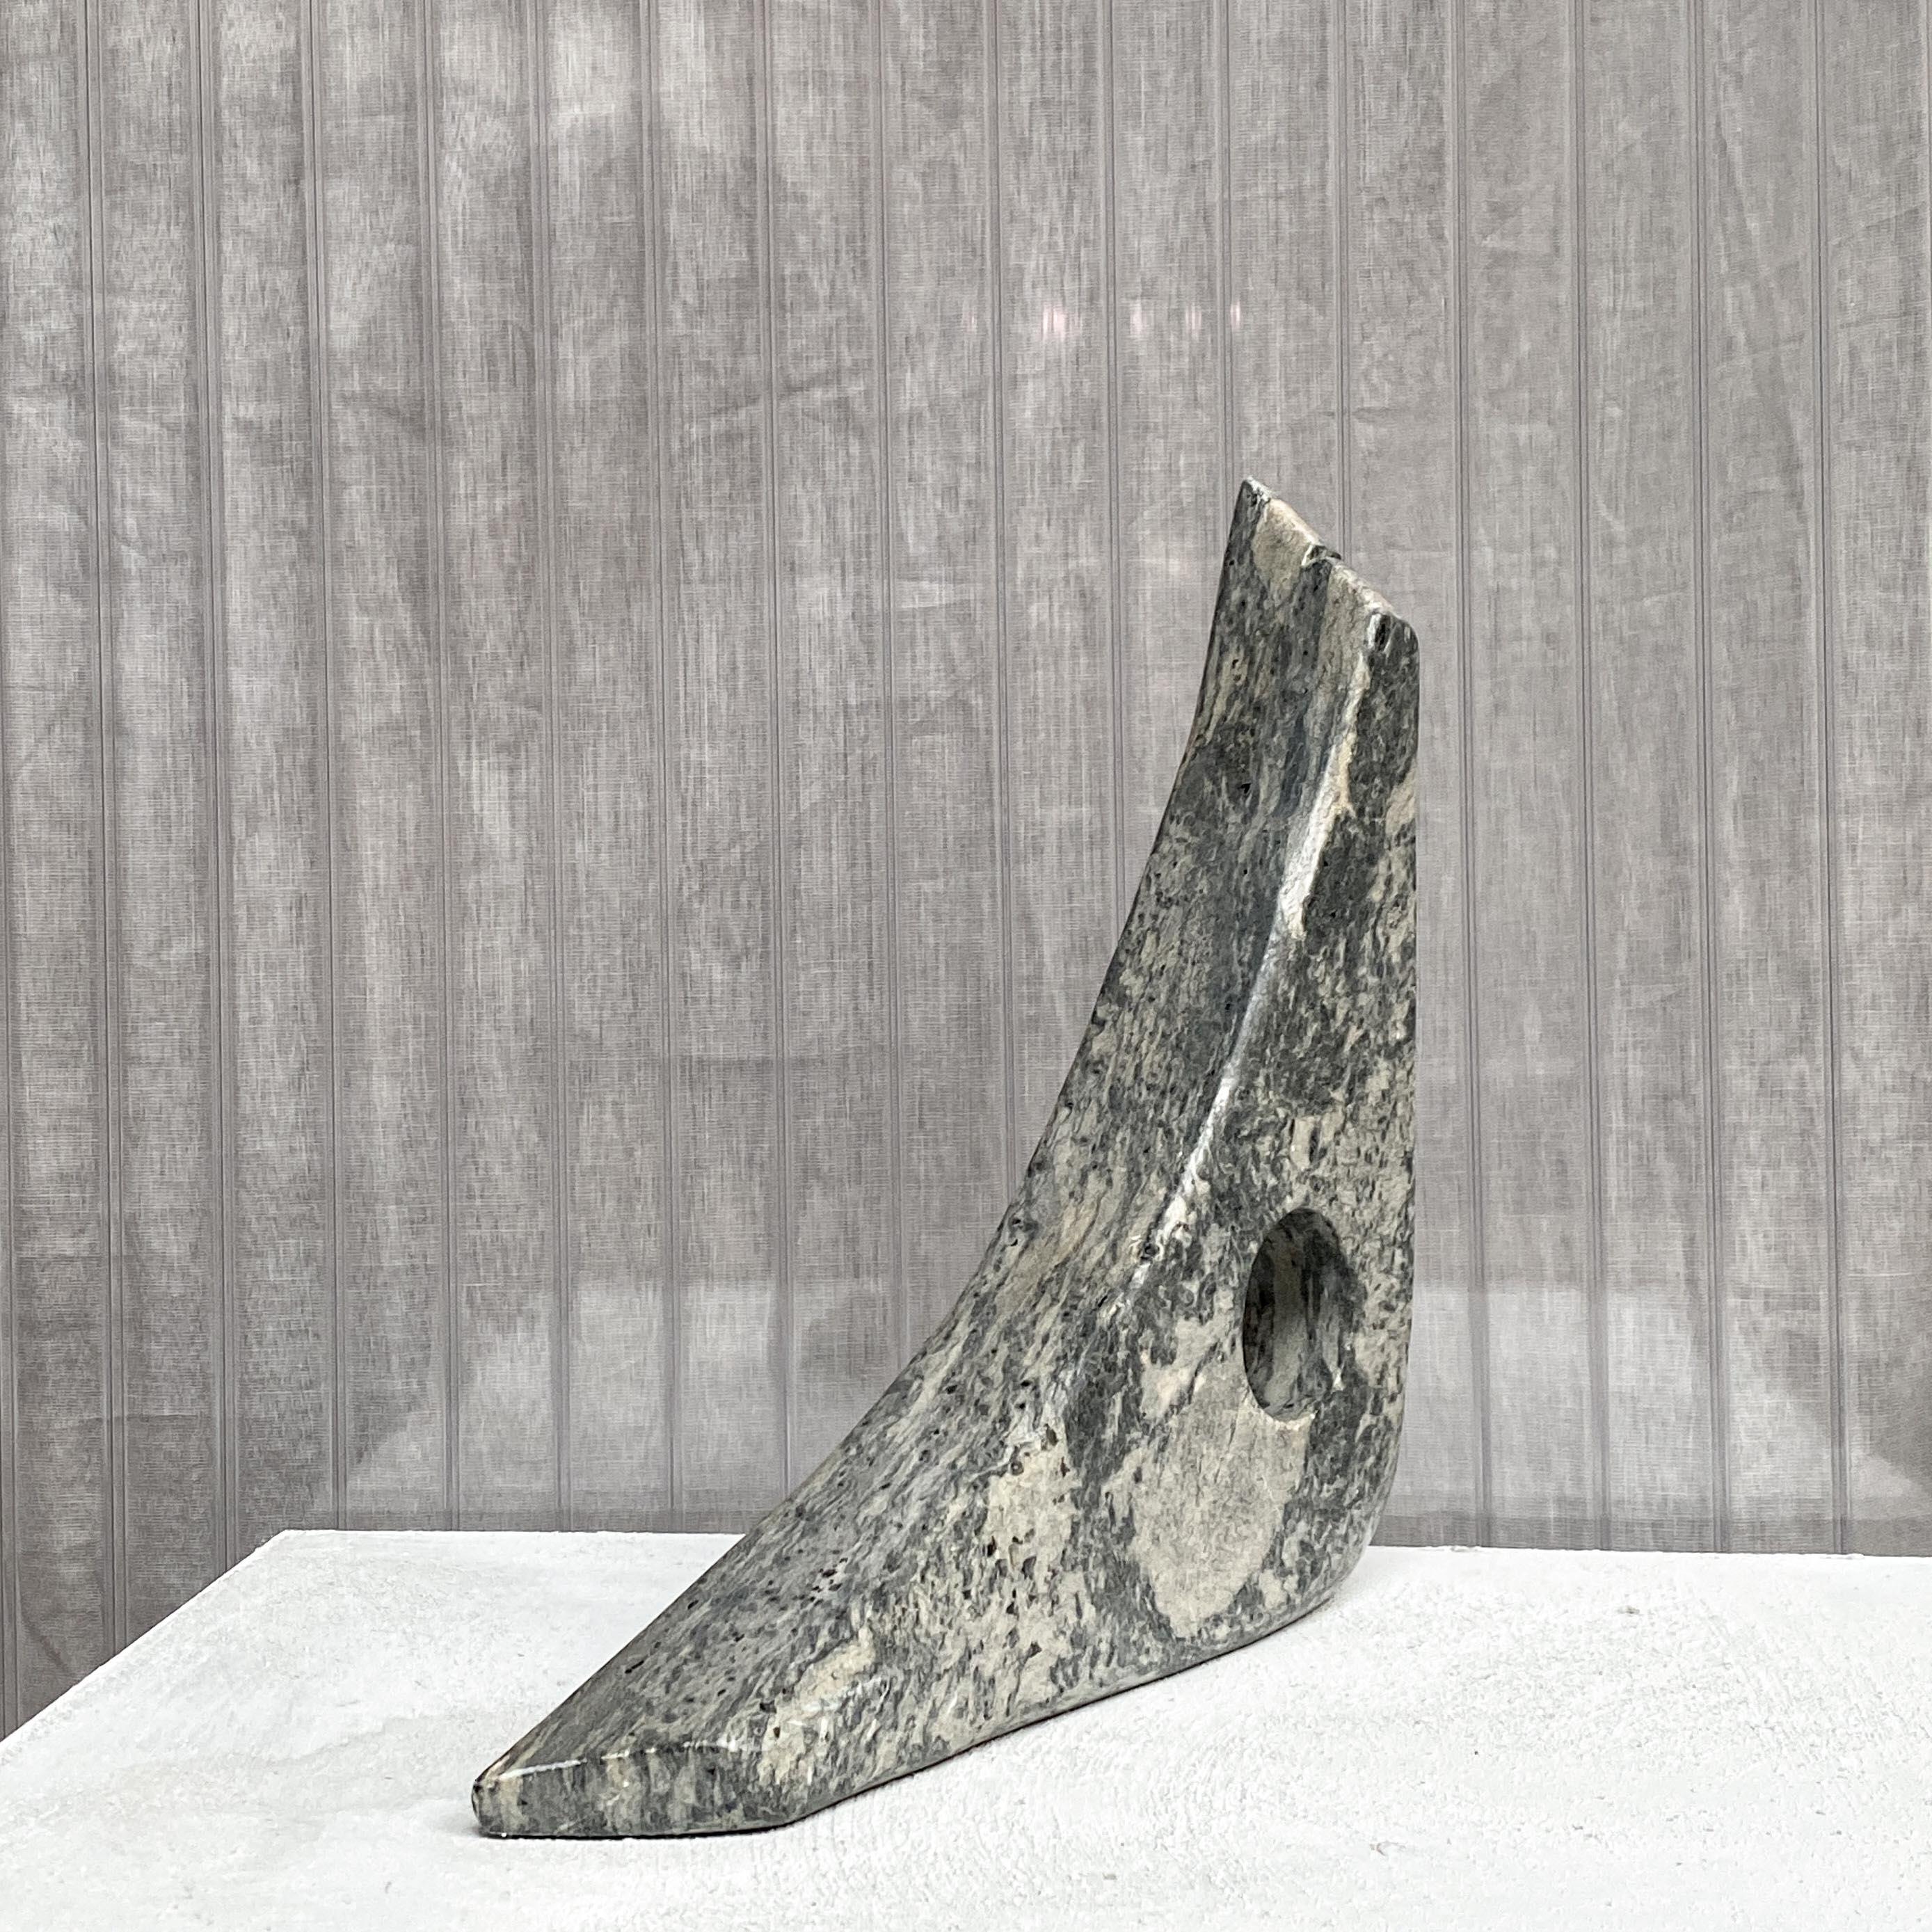 Mid-Century Modern Modernist Stone Sculpture in Abstract Triangle Shape, 1960s, Noguchi Style